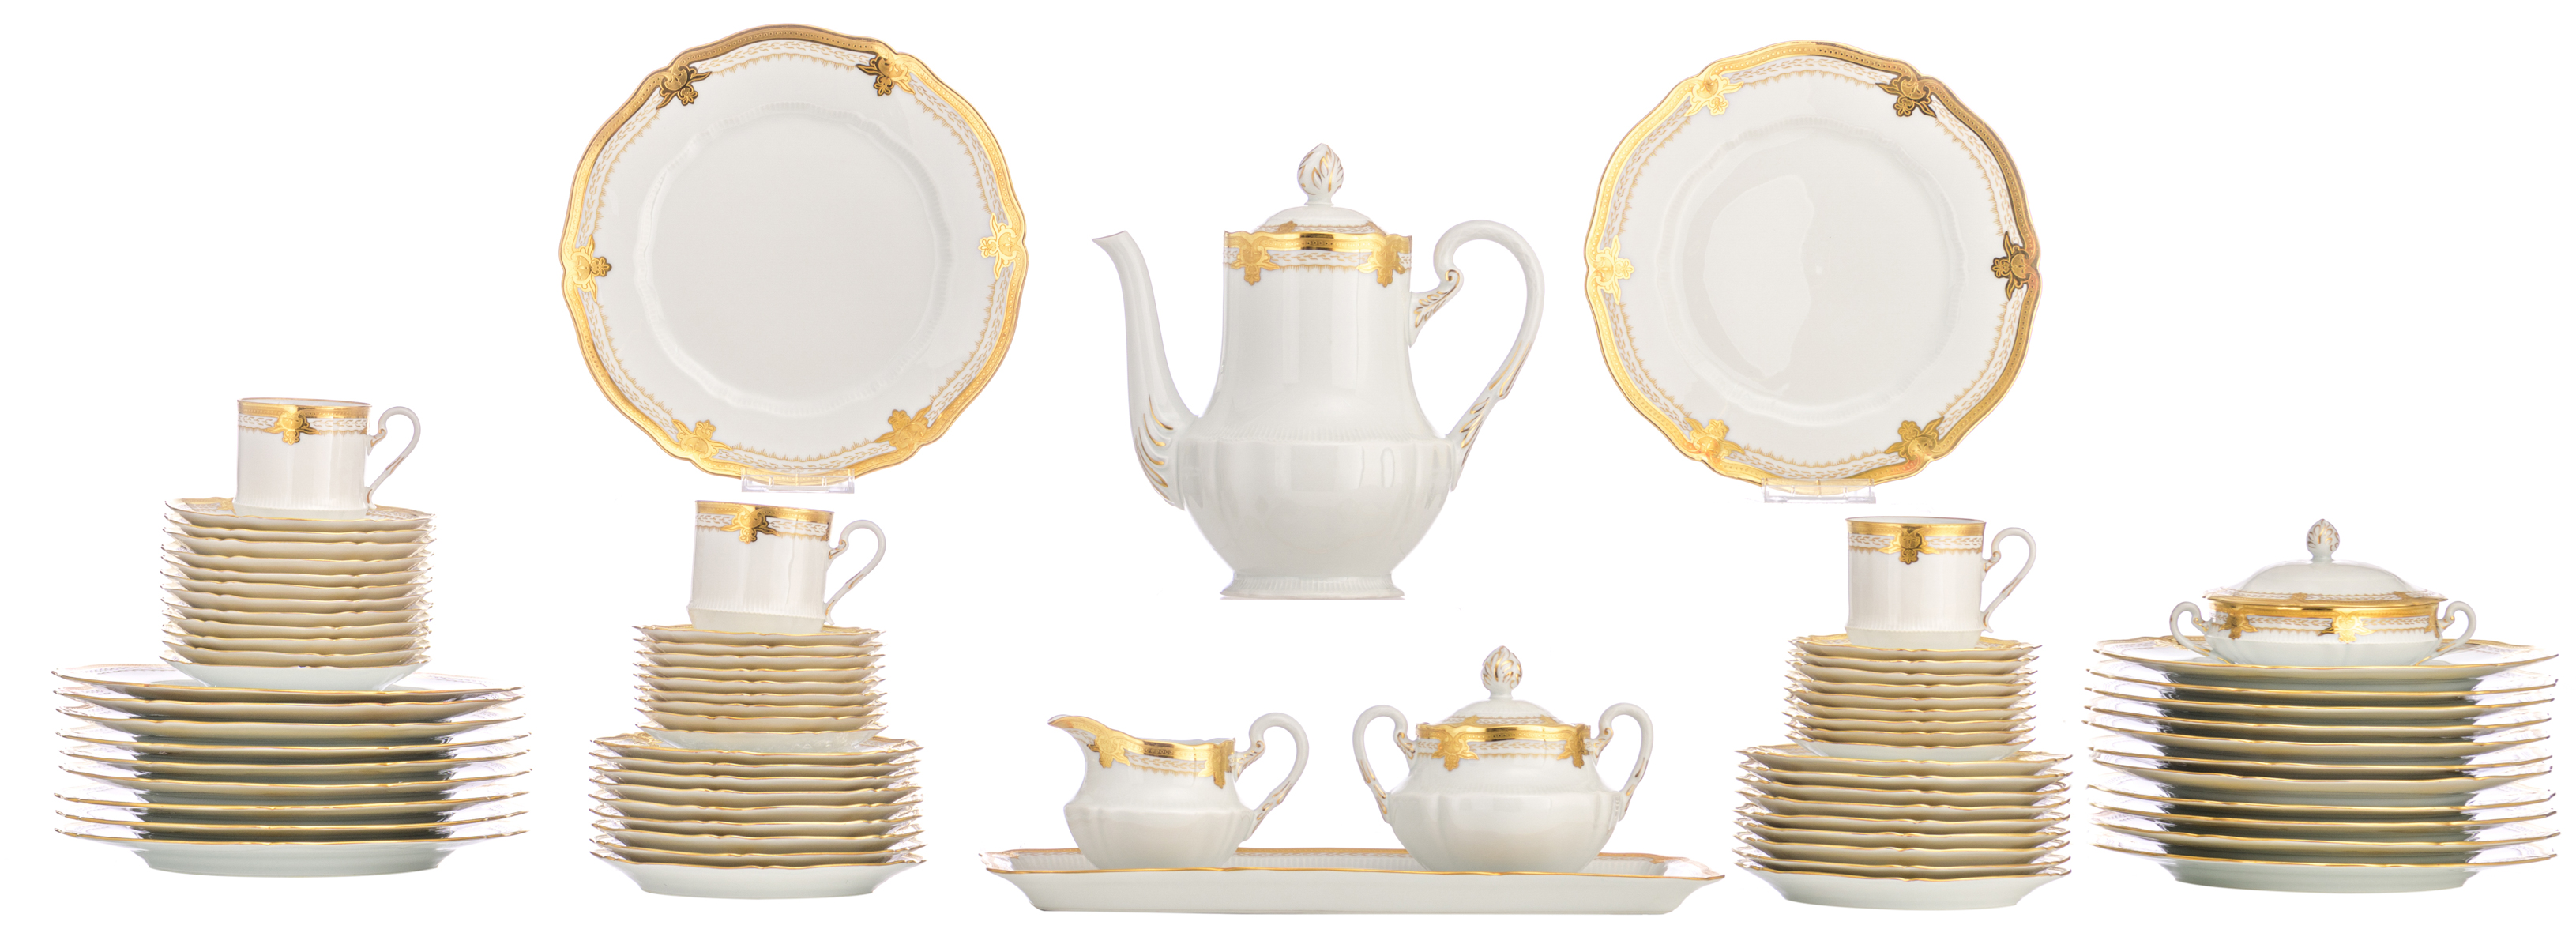 A completely gilt decorated Limoges porcelain dinner and coffee service, marked 'Haviland France', 2 - Image 2 of 10